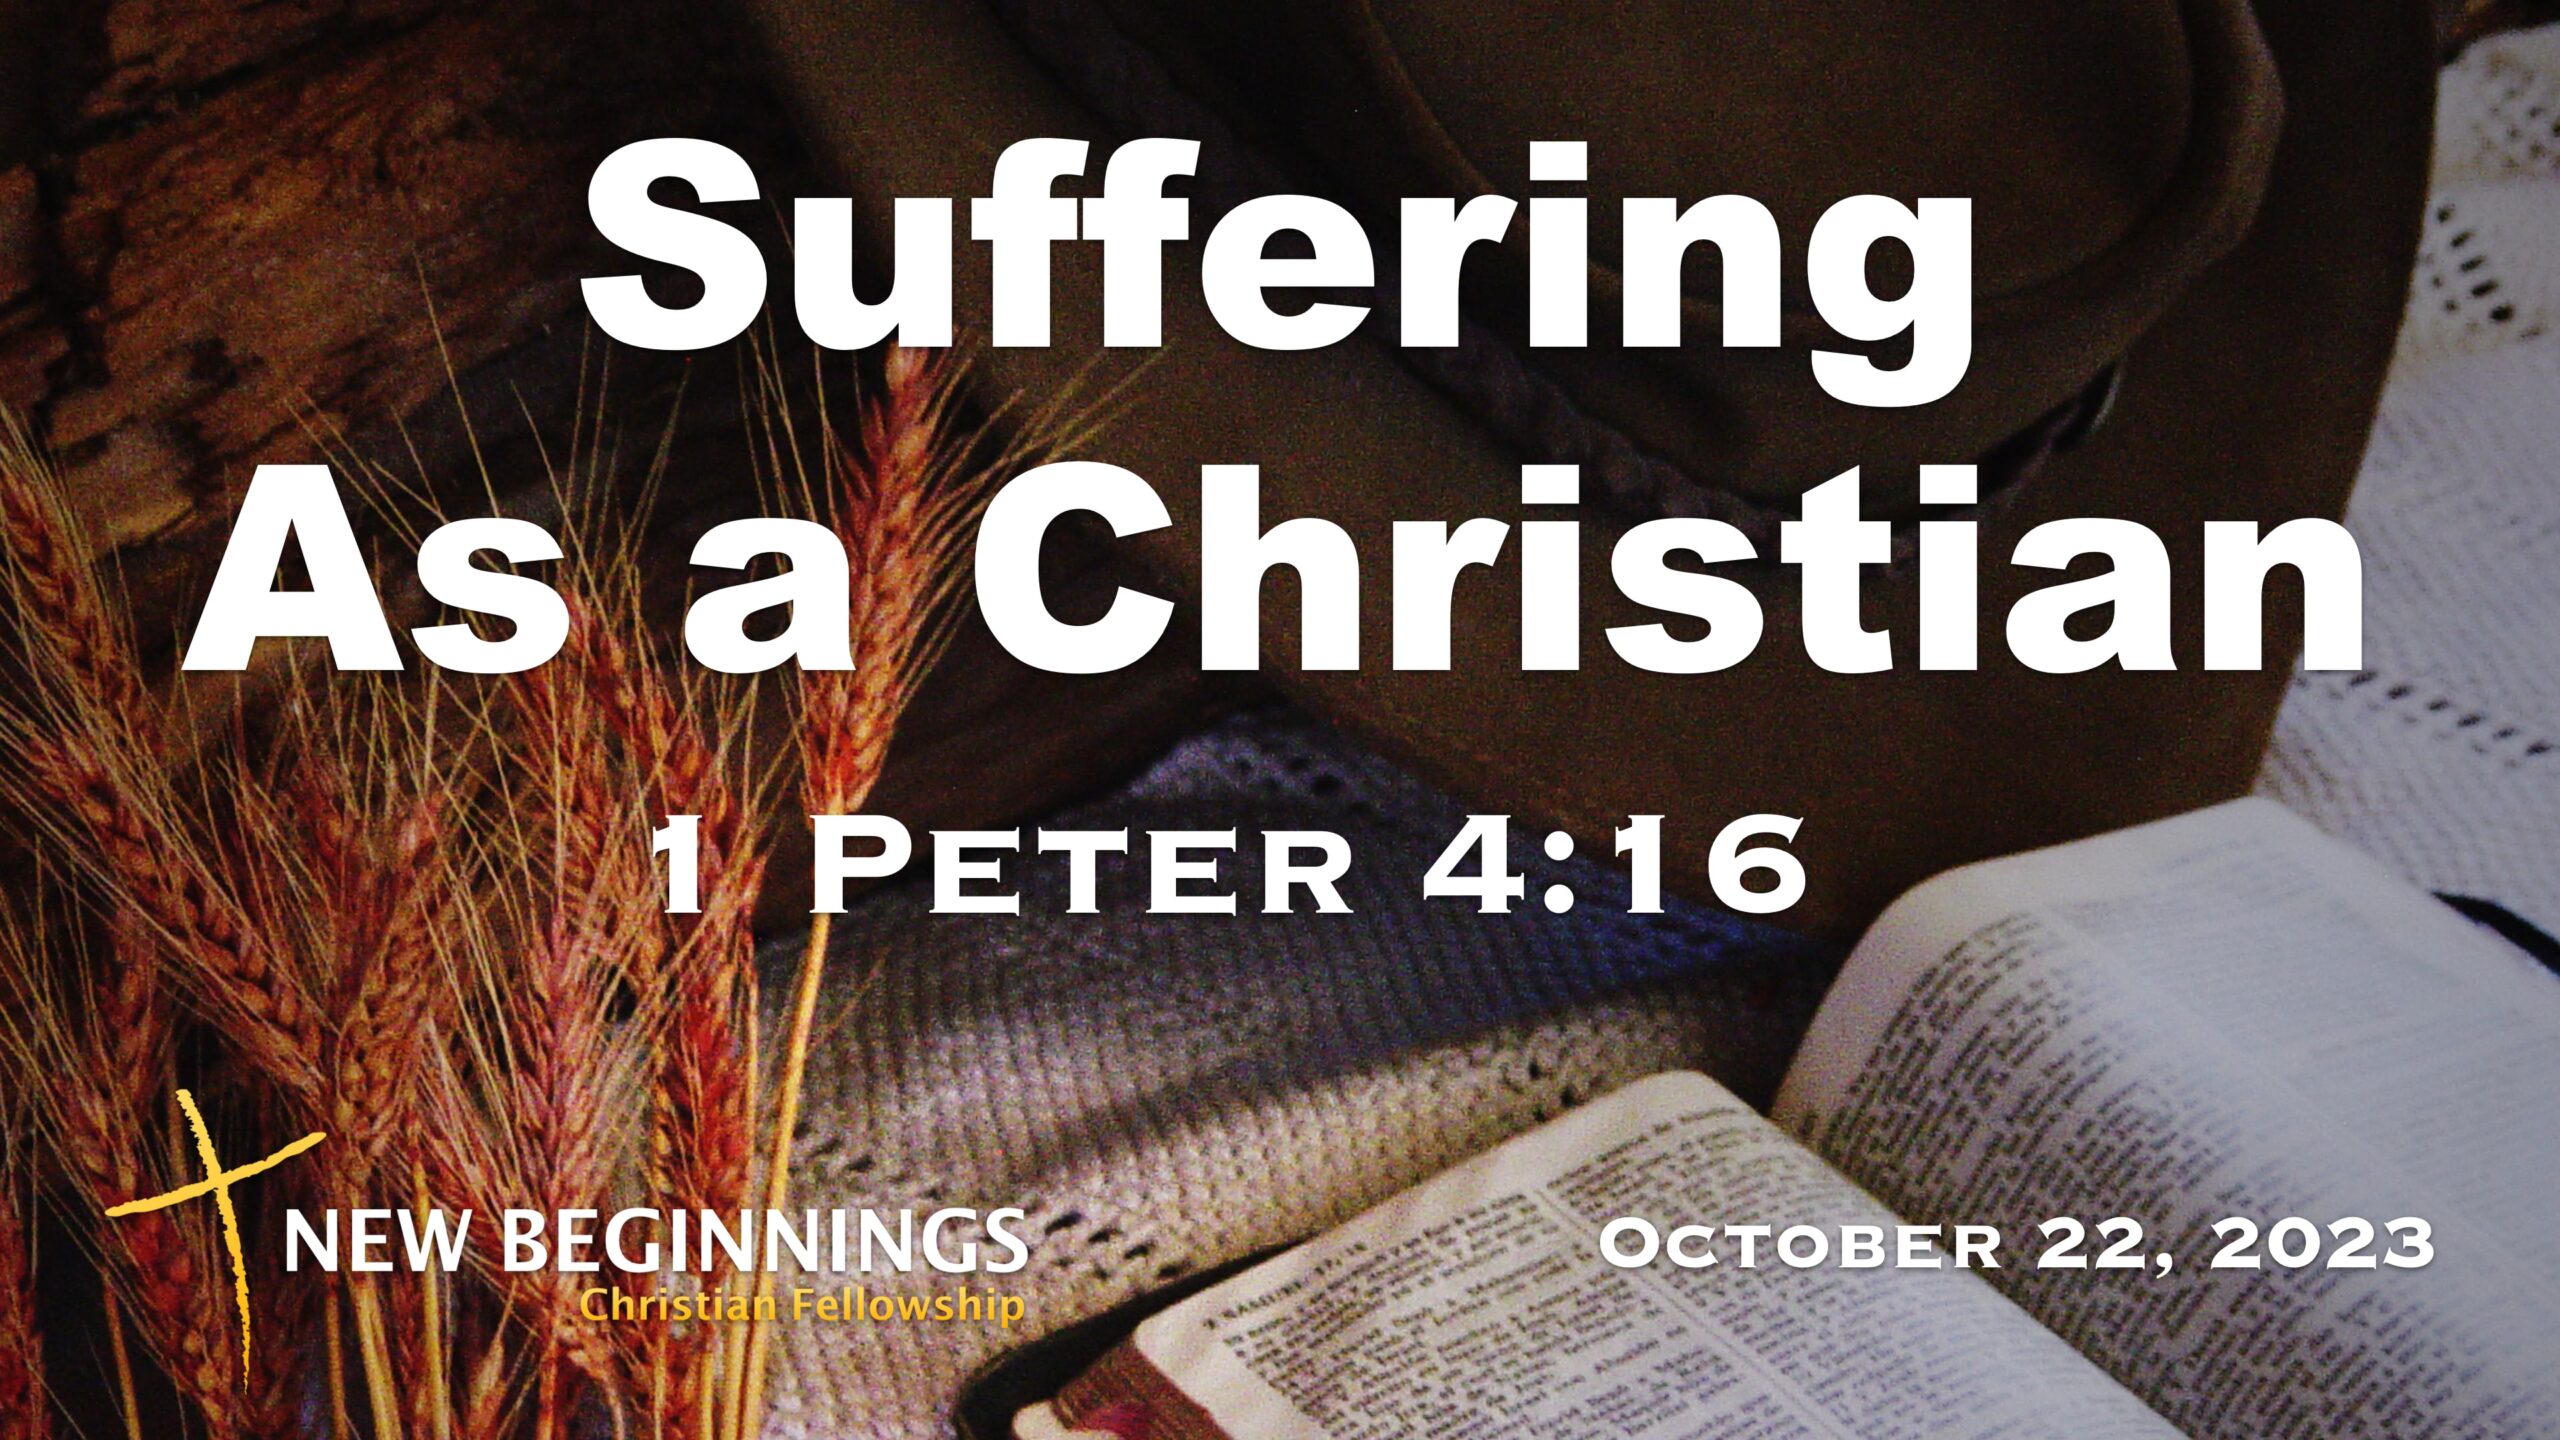 Suffering As A Christian Image